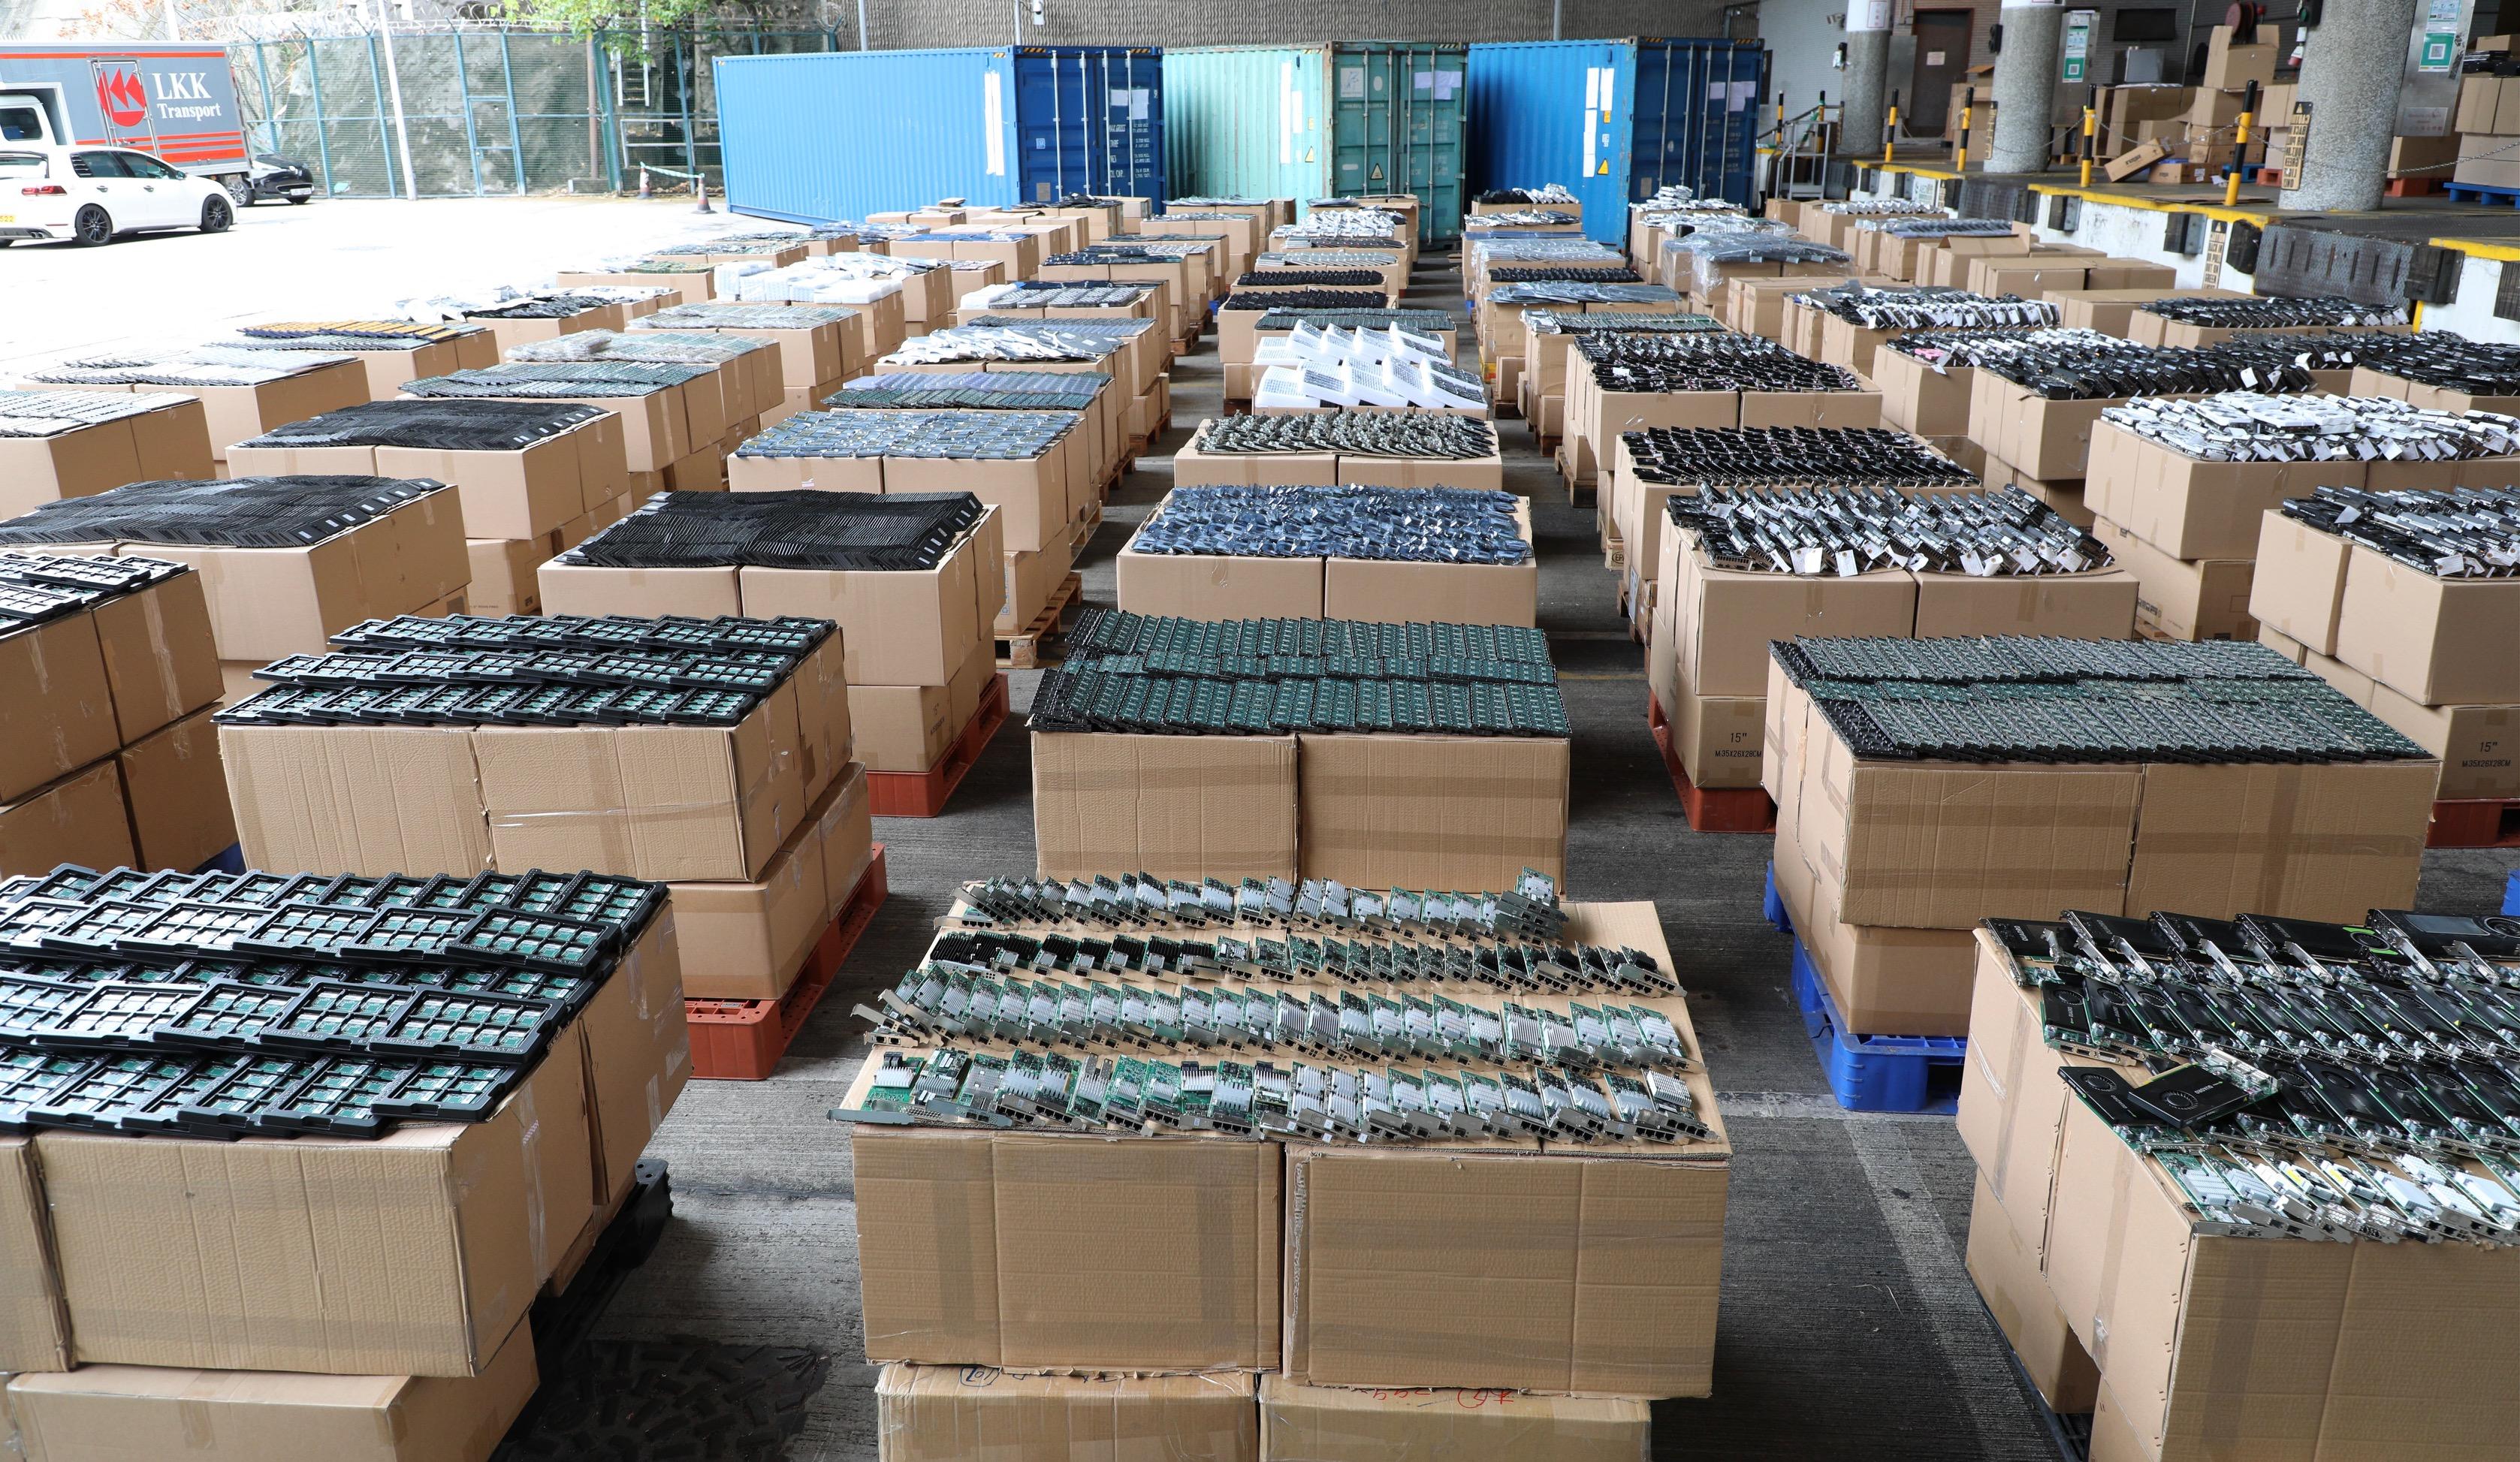 Hong Kong Customs detected a suspected smuggling case using a river trade vessel in the western waters of Hong Kong on April 21. A large batch of suspected smuggled goods with an estimated market value of about $160 million was seized, including assorted electronic products, musical instrument accessories and audio equipment. Photo shows some of the suspected smuggled goods seized.